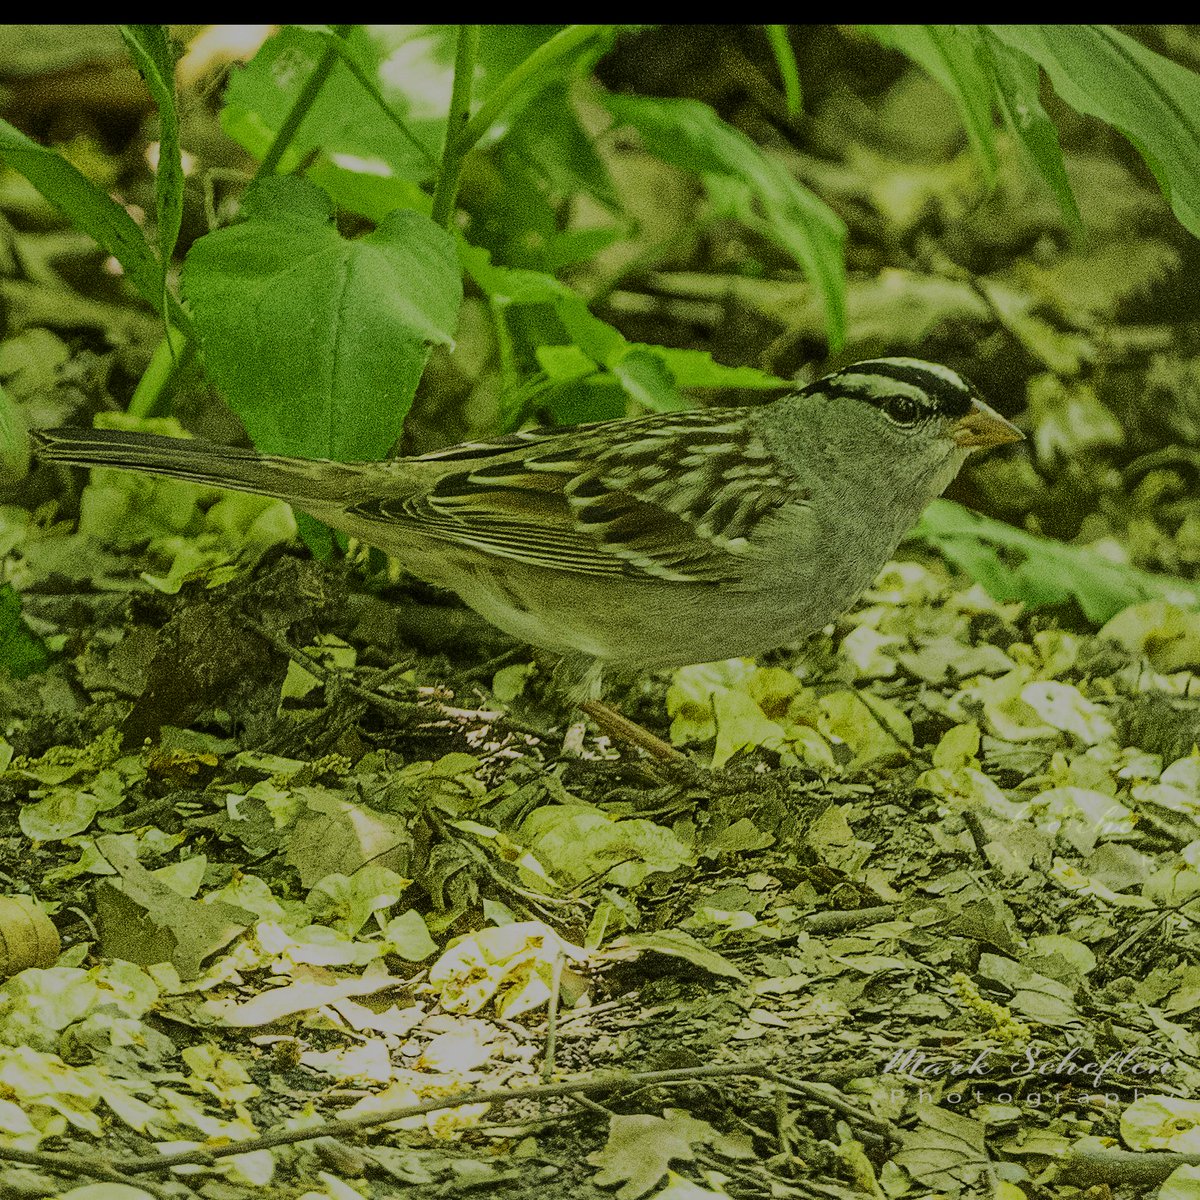 White-crowned Sparrow seen a few weeks ago at pool area, Central Park, NYC  #birdsphotograhy #birdwatching #naturelovers #TwitterNatureCommunity #birdcpp #birdsofinstagram #warblers #warblersofinstagram #centralpark